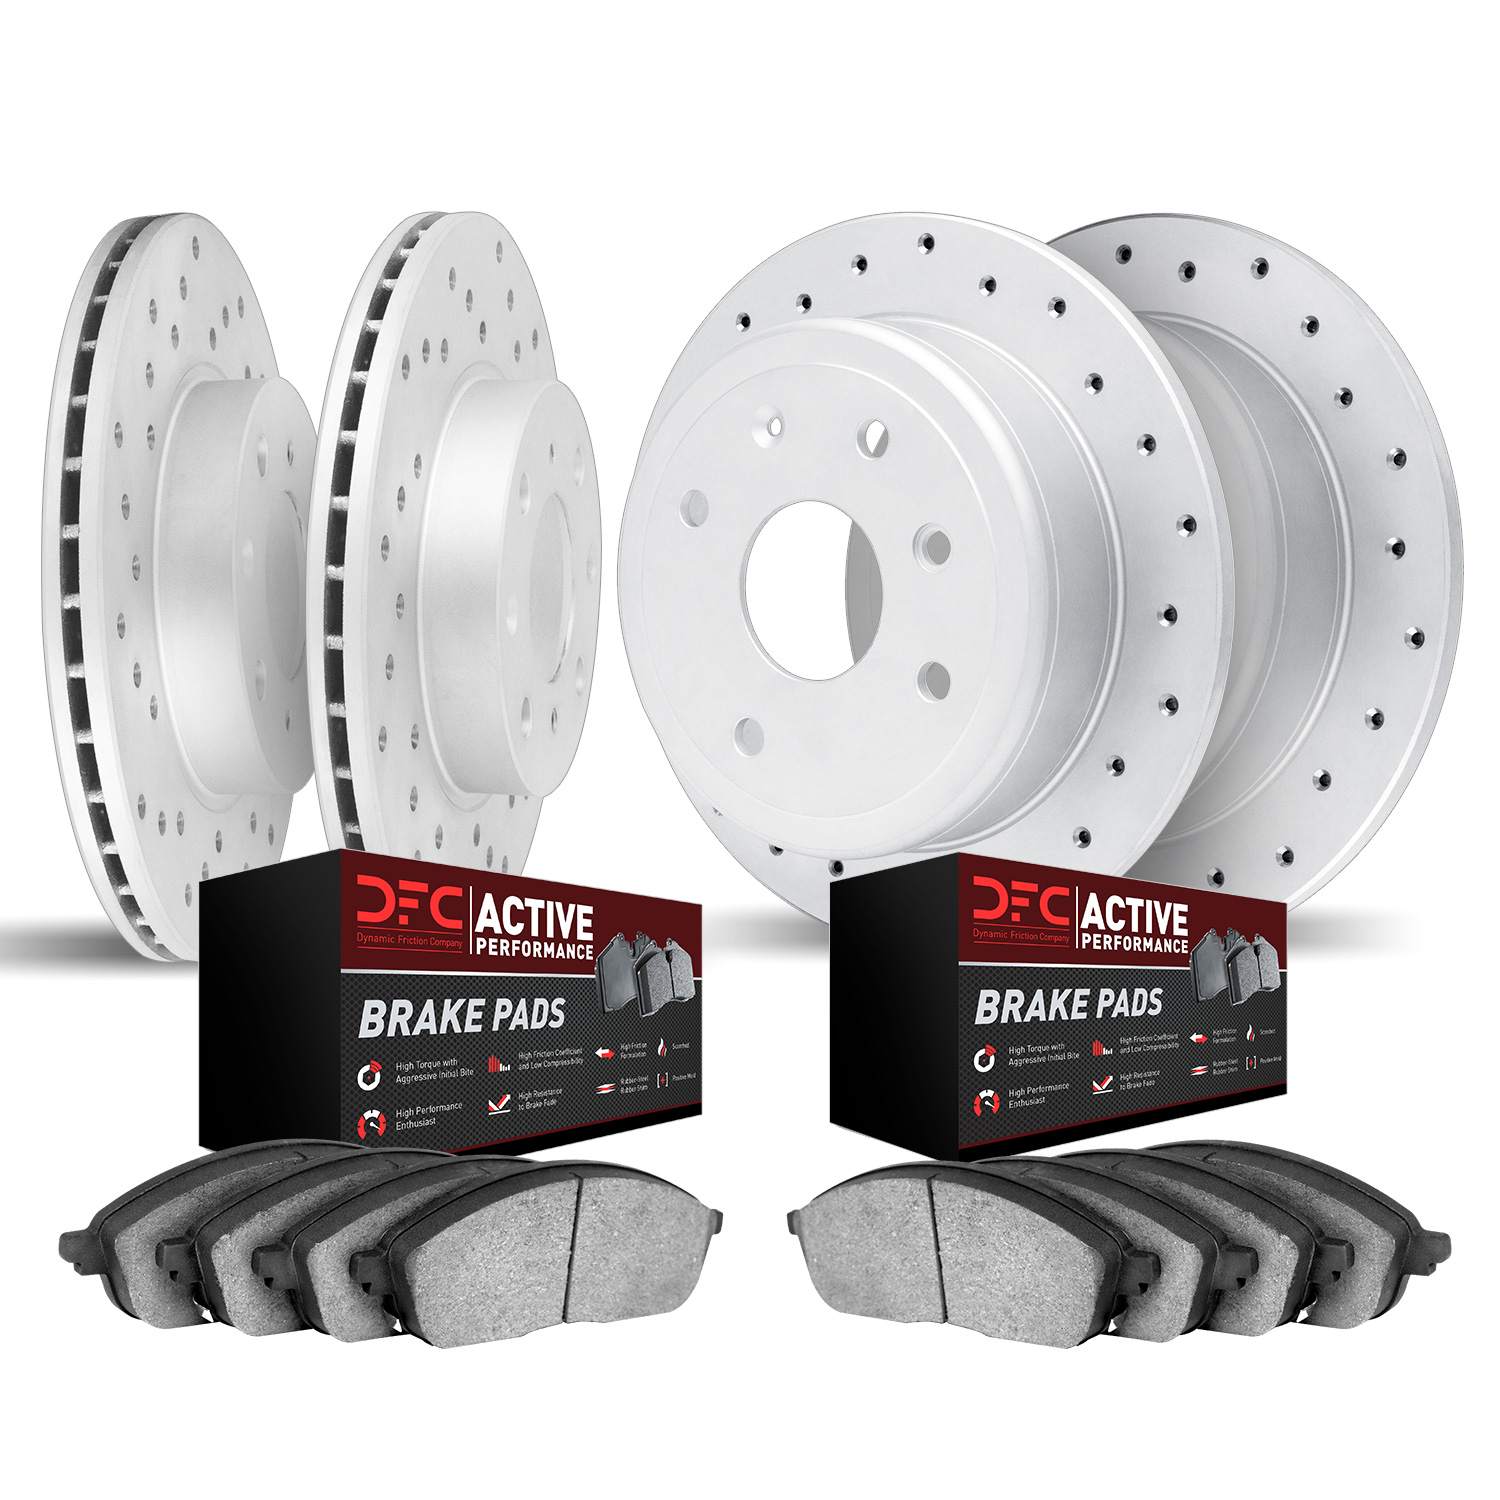 2704-32005 Geoperformance Drilled Brake Rotors with Active Performance Pads Kit, 2007-2015 Mini, Position: Front and Rear